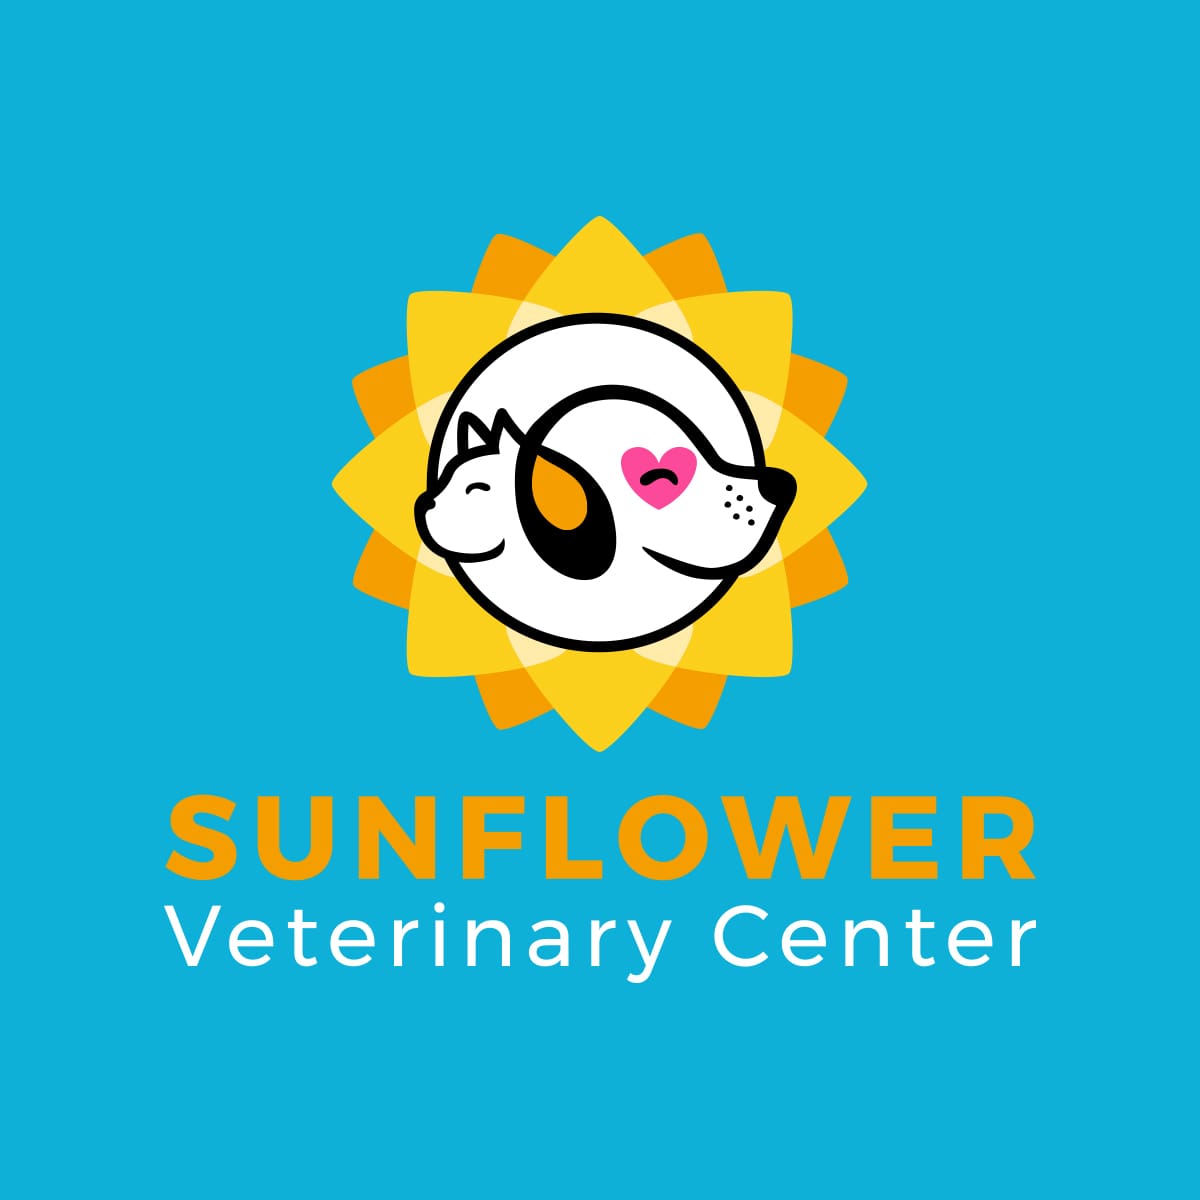 <span style="font-size: 21px;"><strong>Sunflower<br> Veterinary Center</strong></span><br>
Logo design